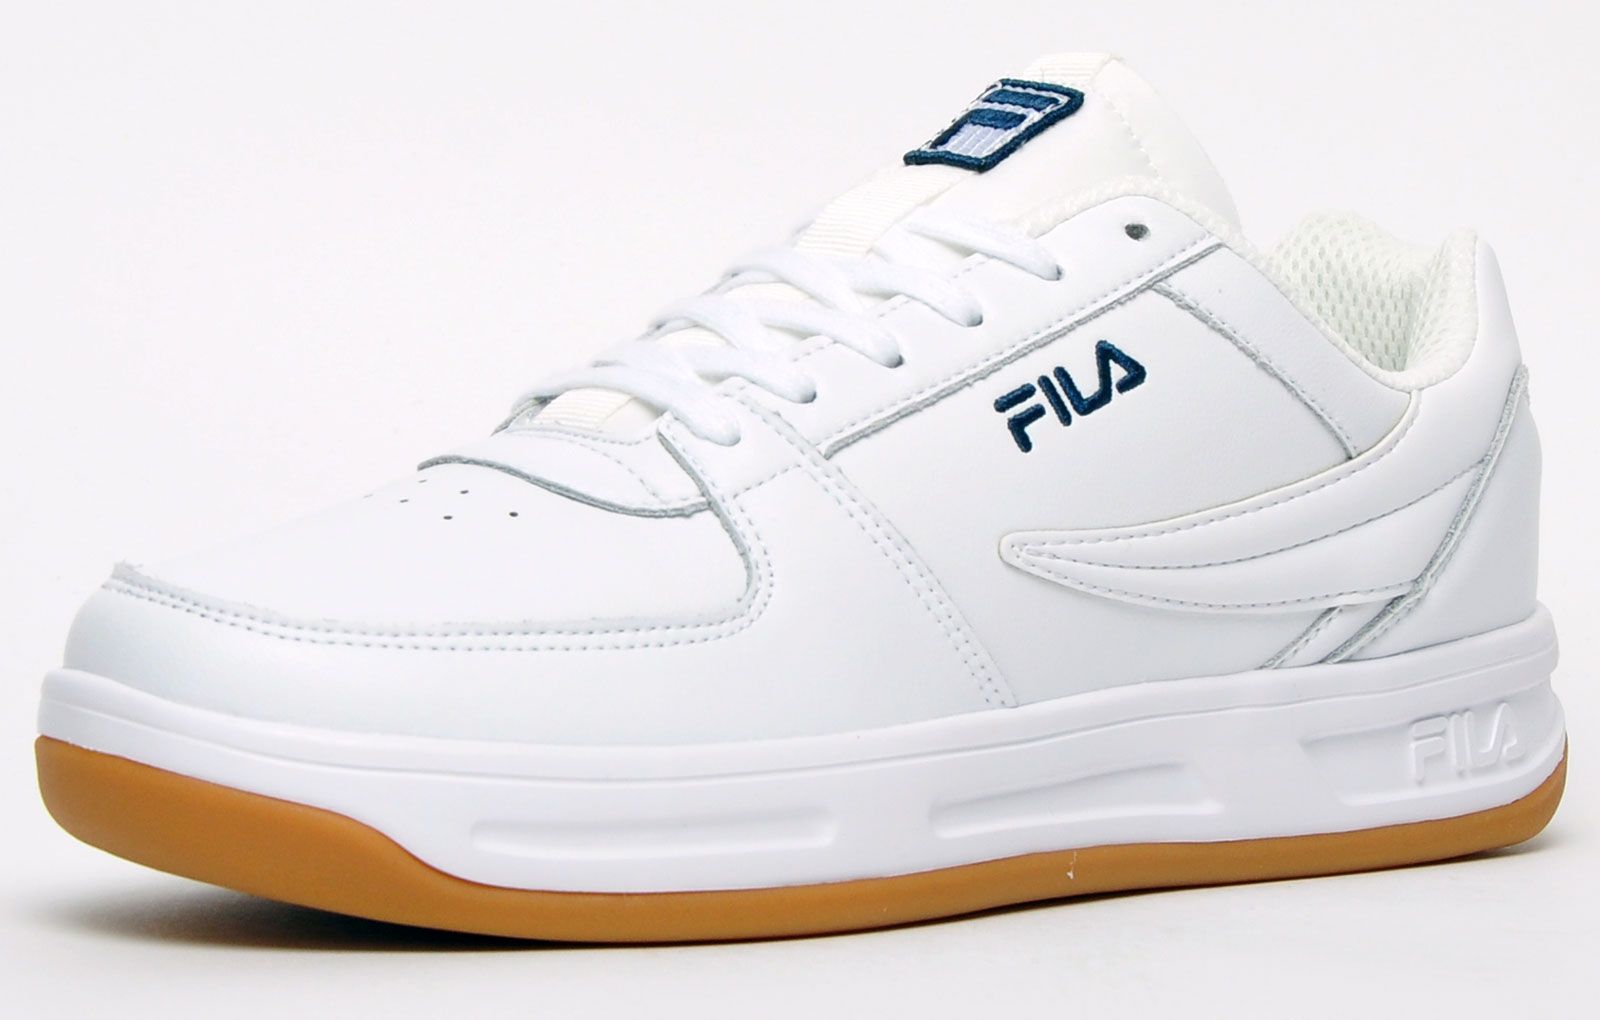 These Fila Classic Defender men’s trainers are the only option for casual days out, providing a stylish design that is guaranteed to get you noticed, whilst the timeless look will never go out of fashion, perfect for year round wear! <p class=